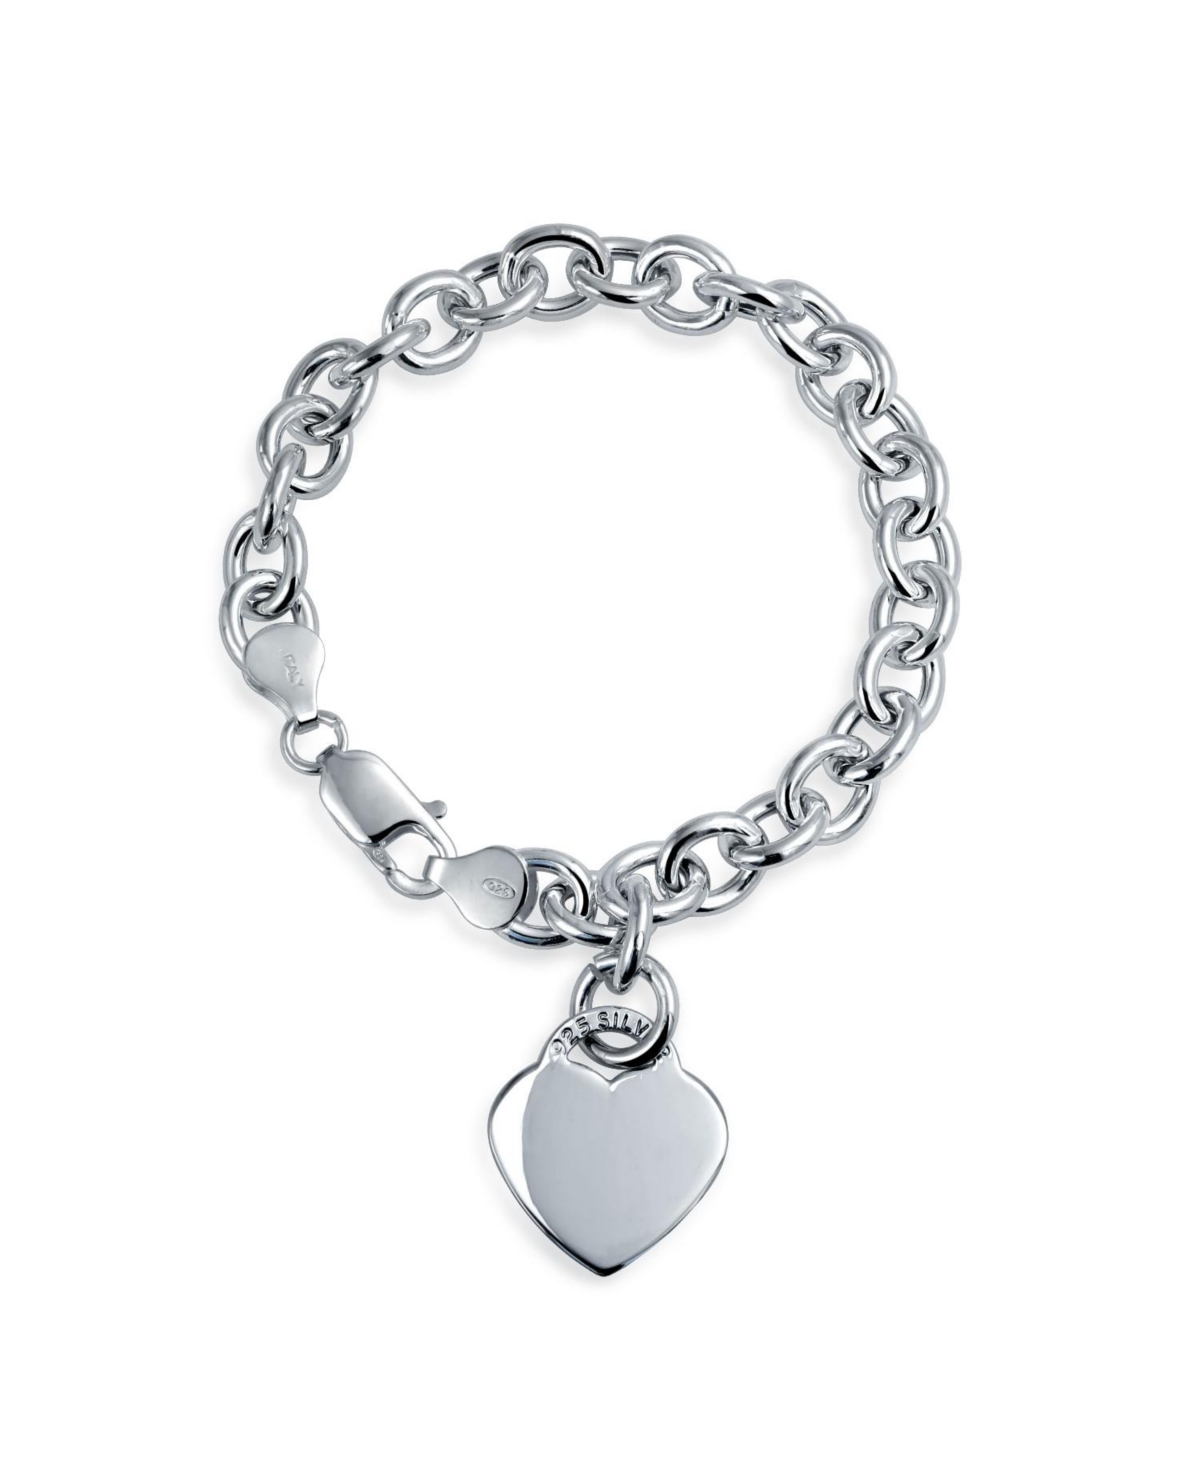 7.5 Closet Bracelet in Tag Bling - .925 Sterling Solid Italy | Women Jewelry Silver Inch Shape Teens Smart Heart For Link Silver Charm Made